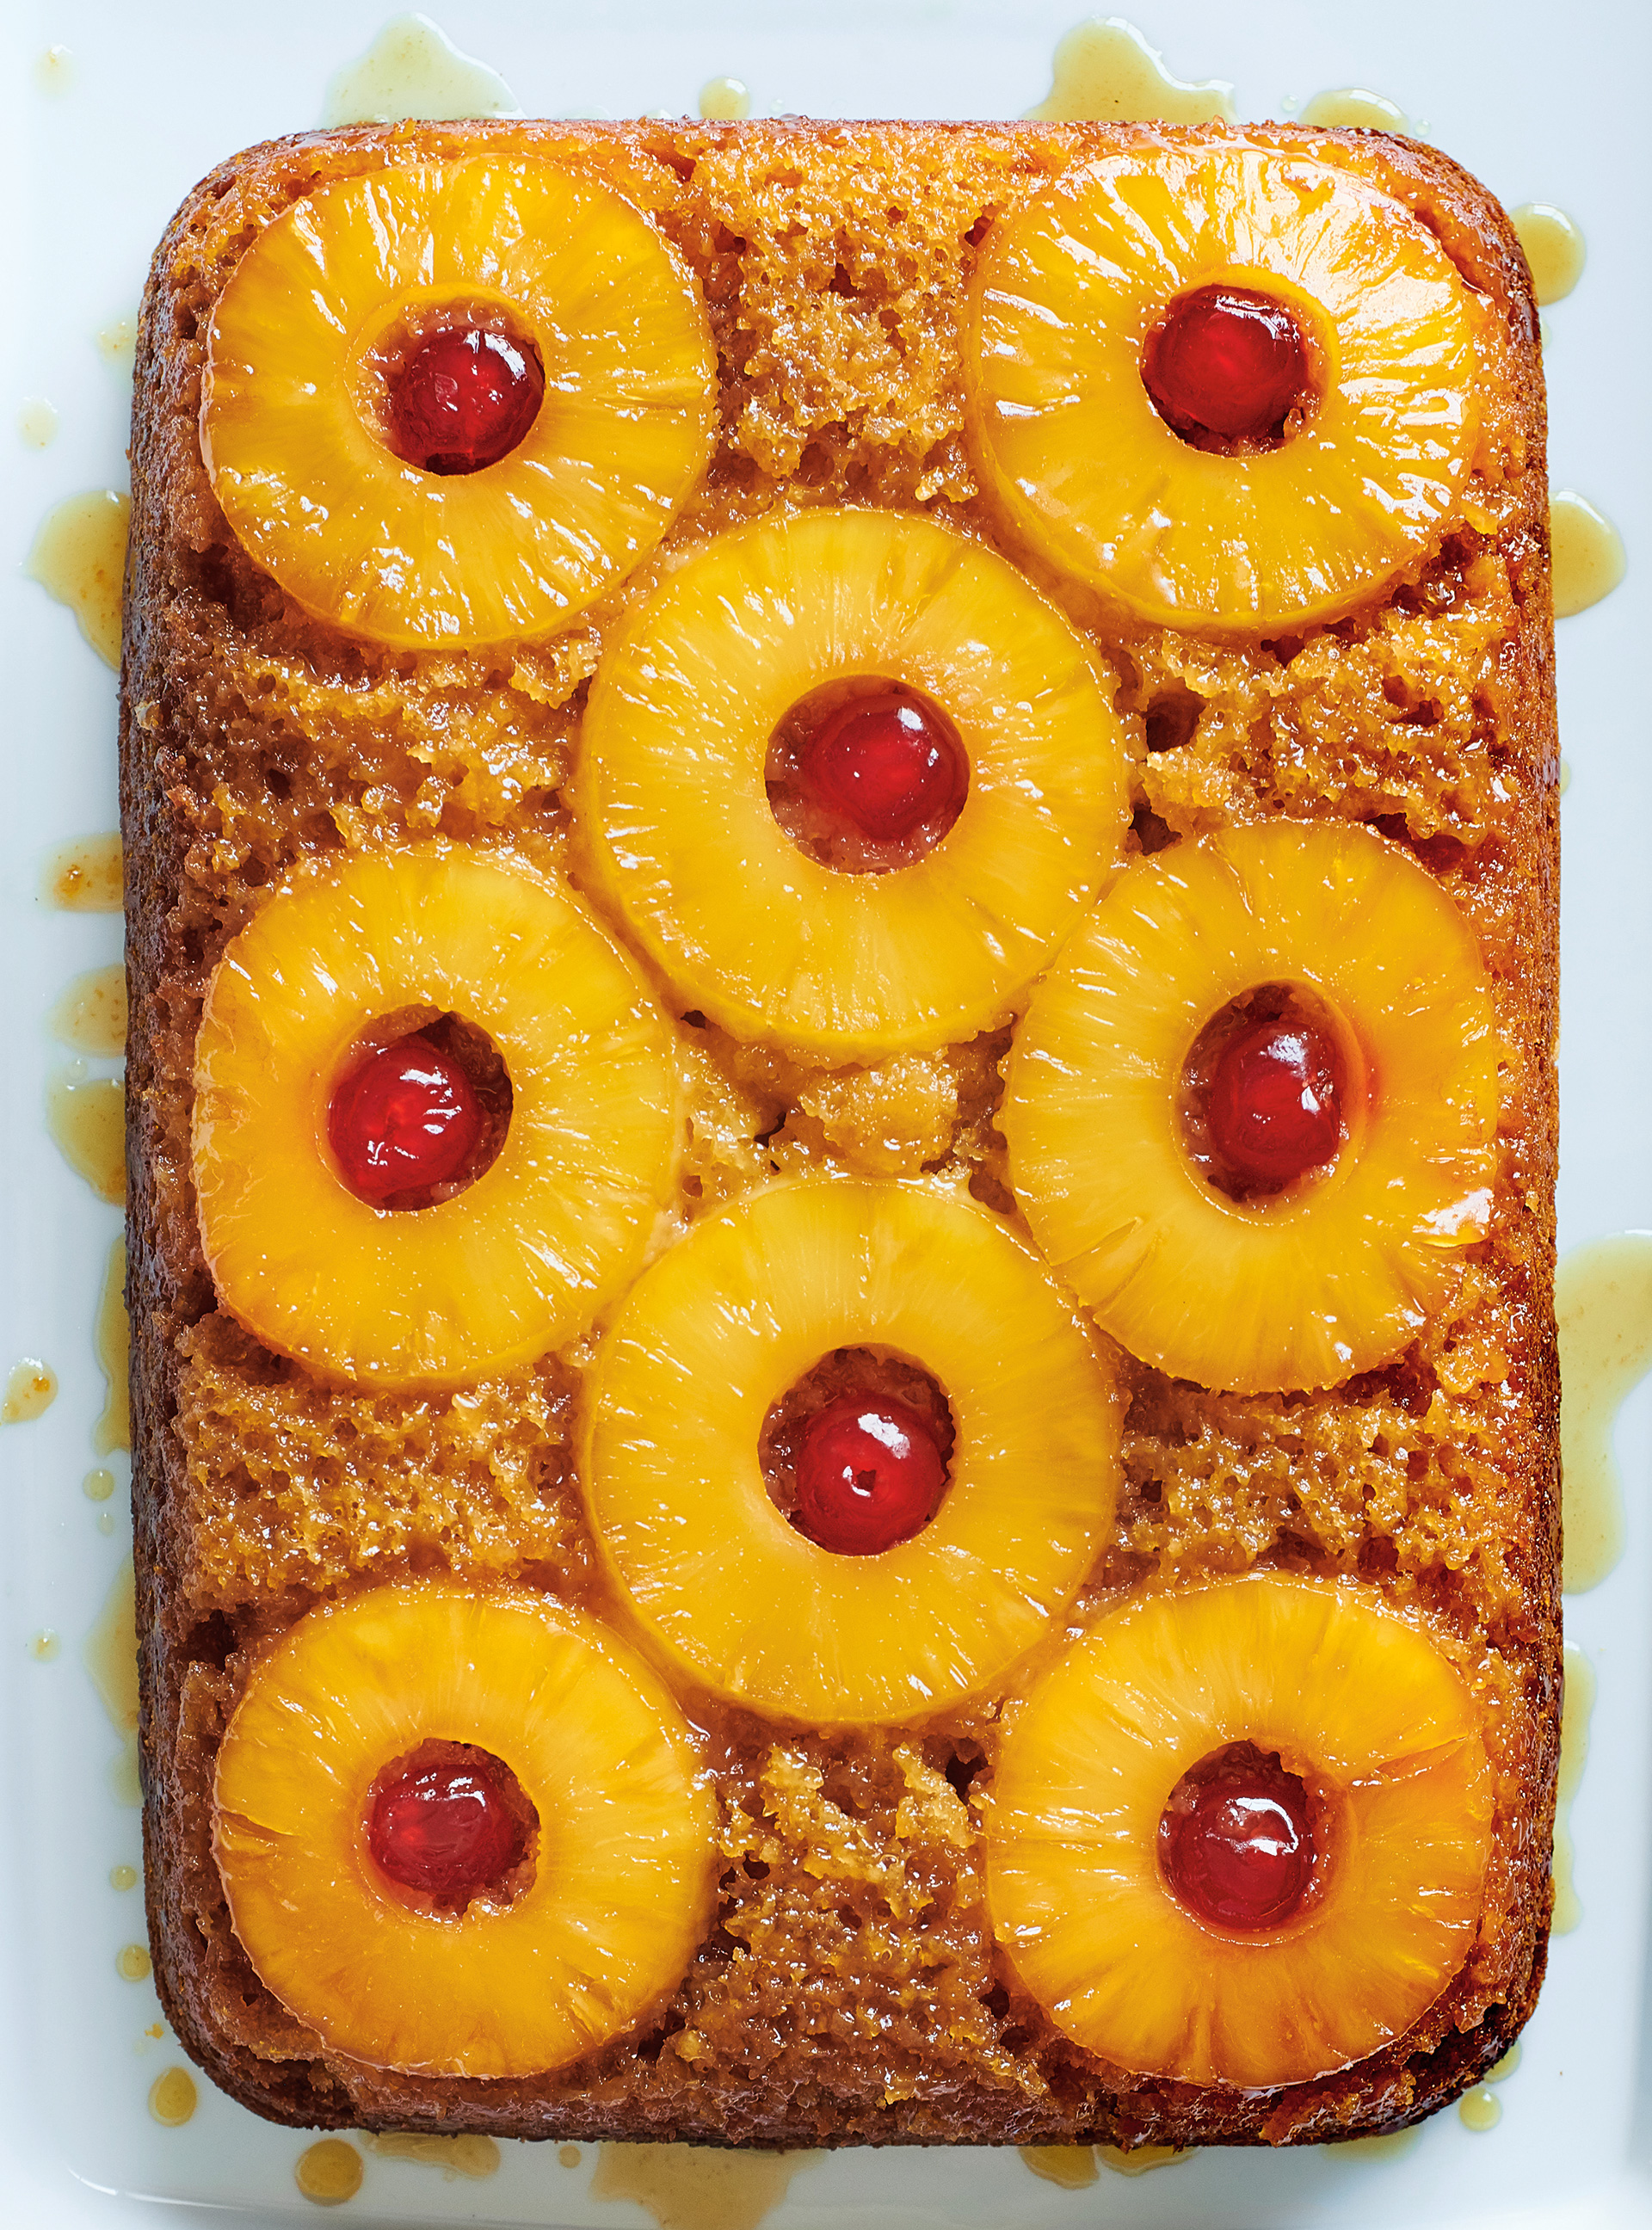 Pineapple Upside Down Cake Recipe - Cooking Classy